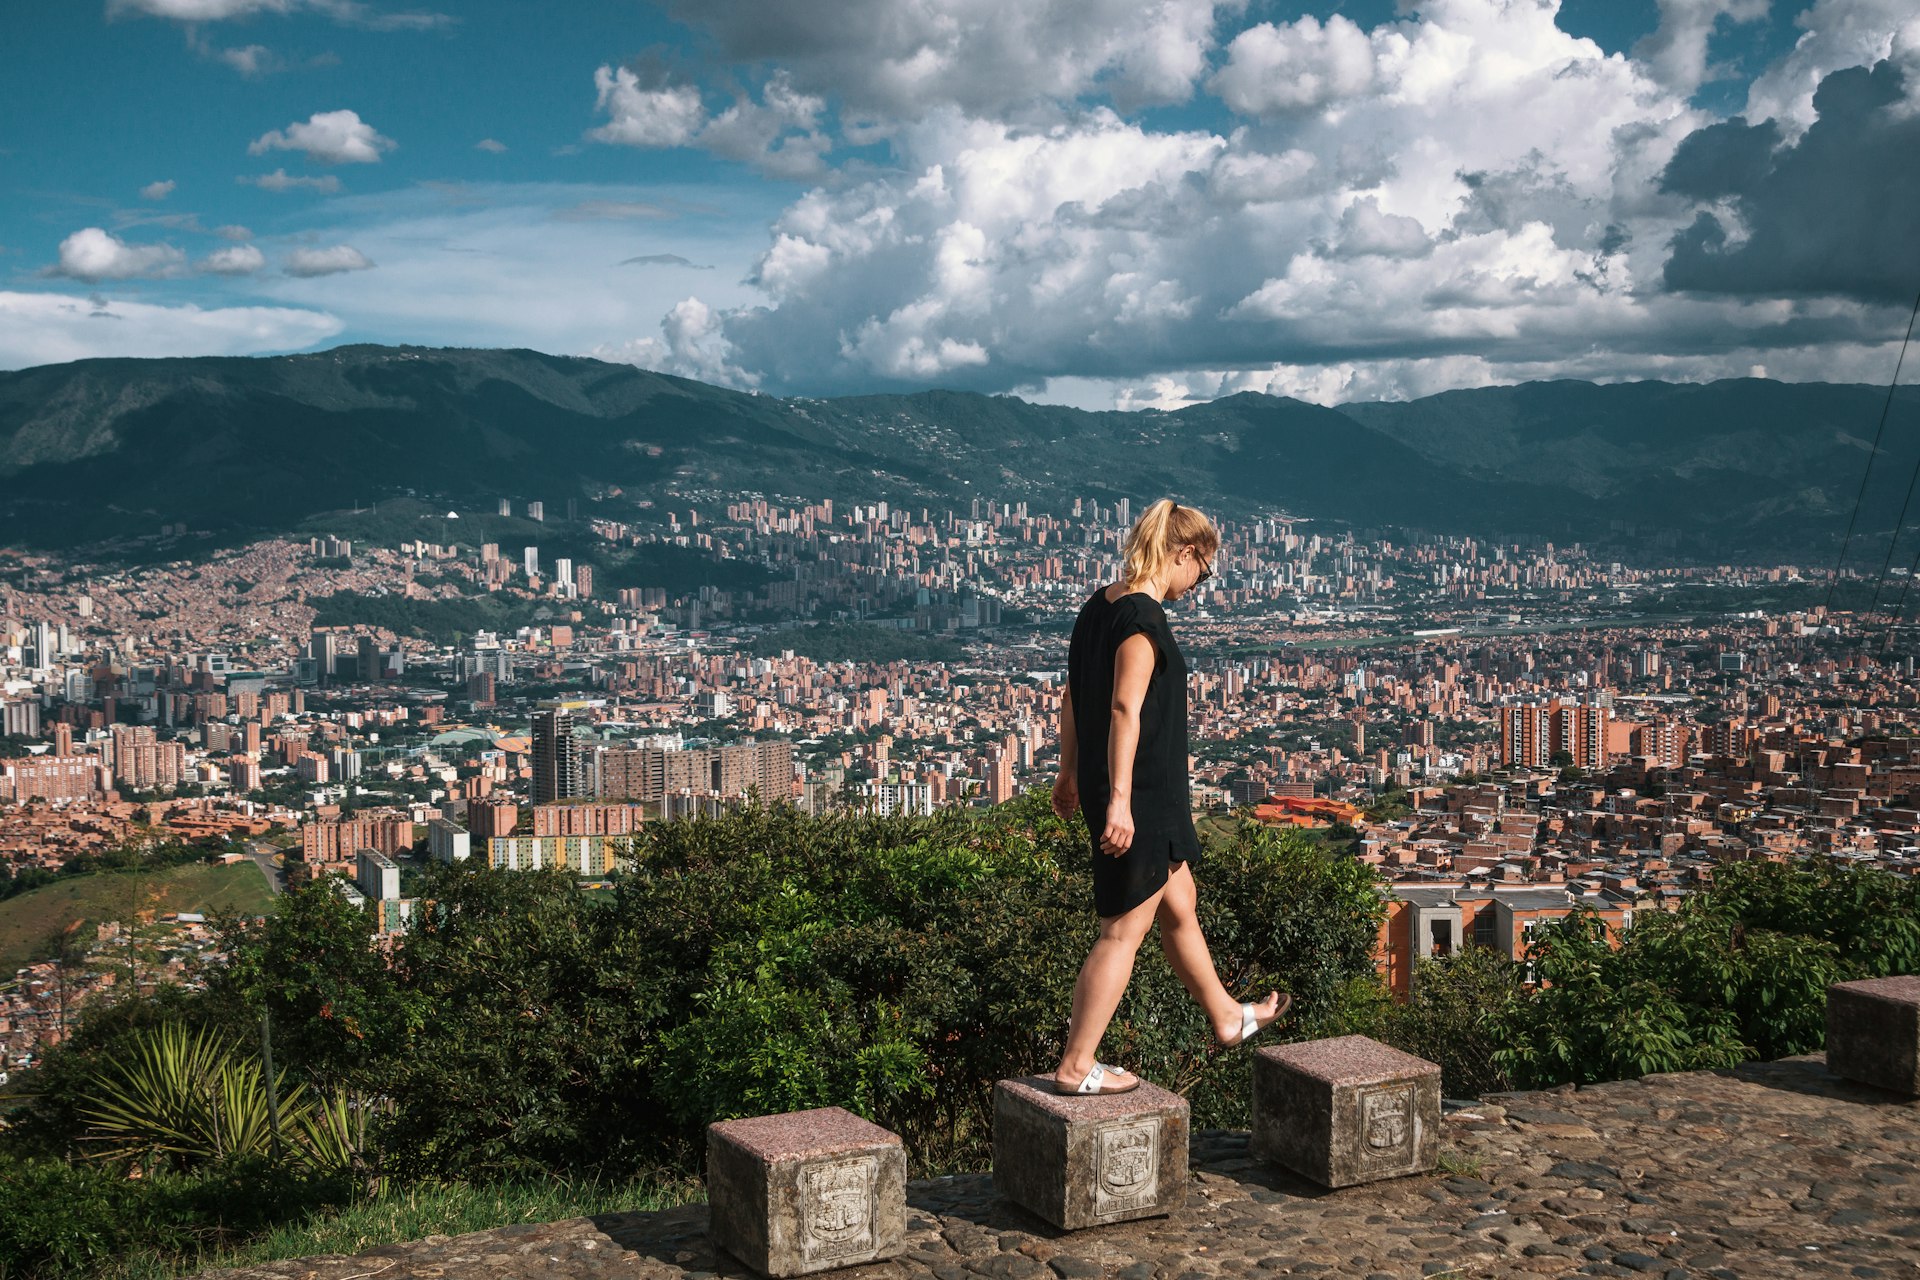 A woman walks on stepping stones with a view of a city stretching out before her